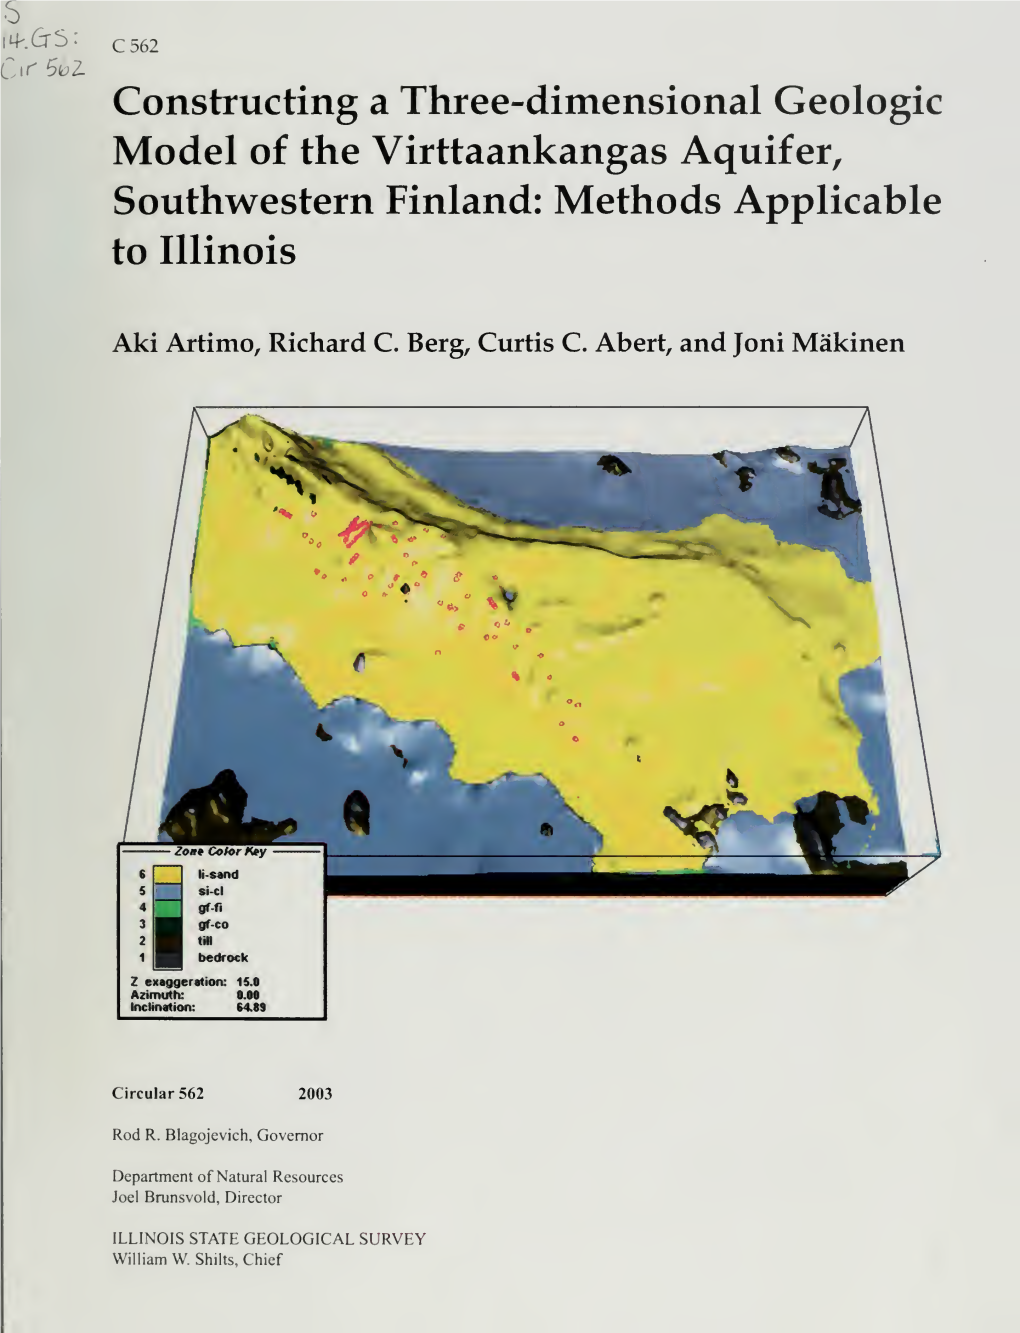 Constructing a Three-Dimensional Geologic Model of the Virttaankangas Aquifer, Southwestern Finland: Methods Applicable to Illinois